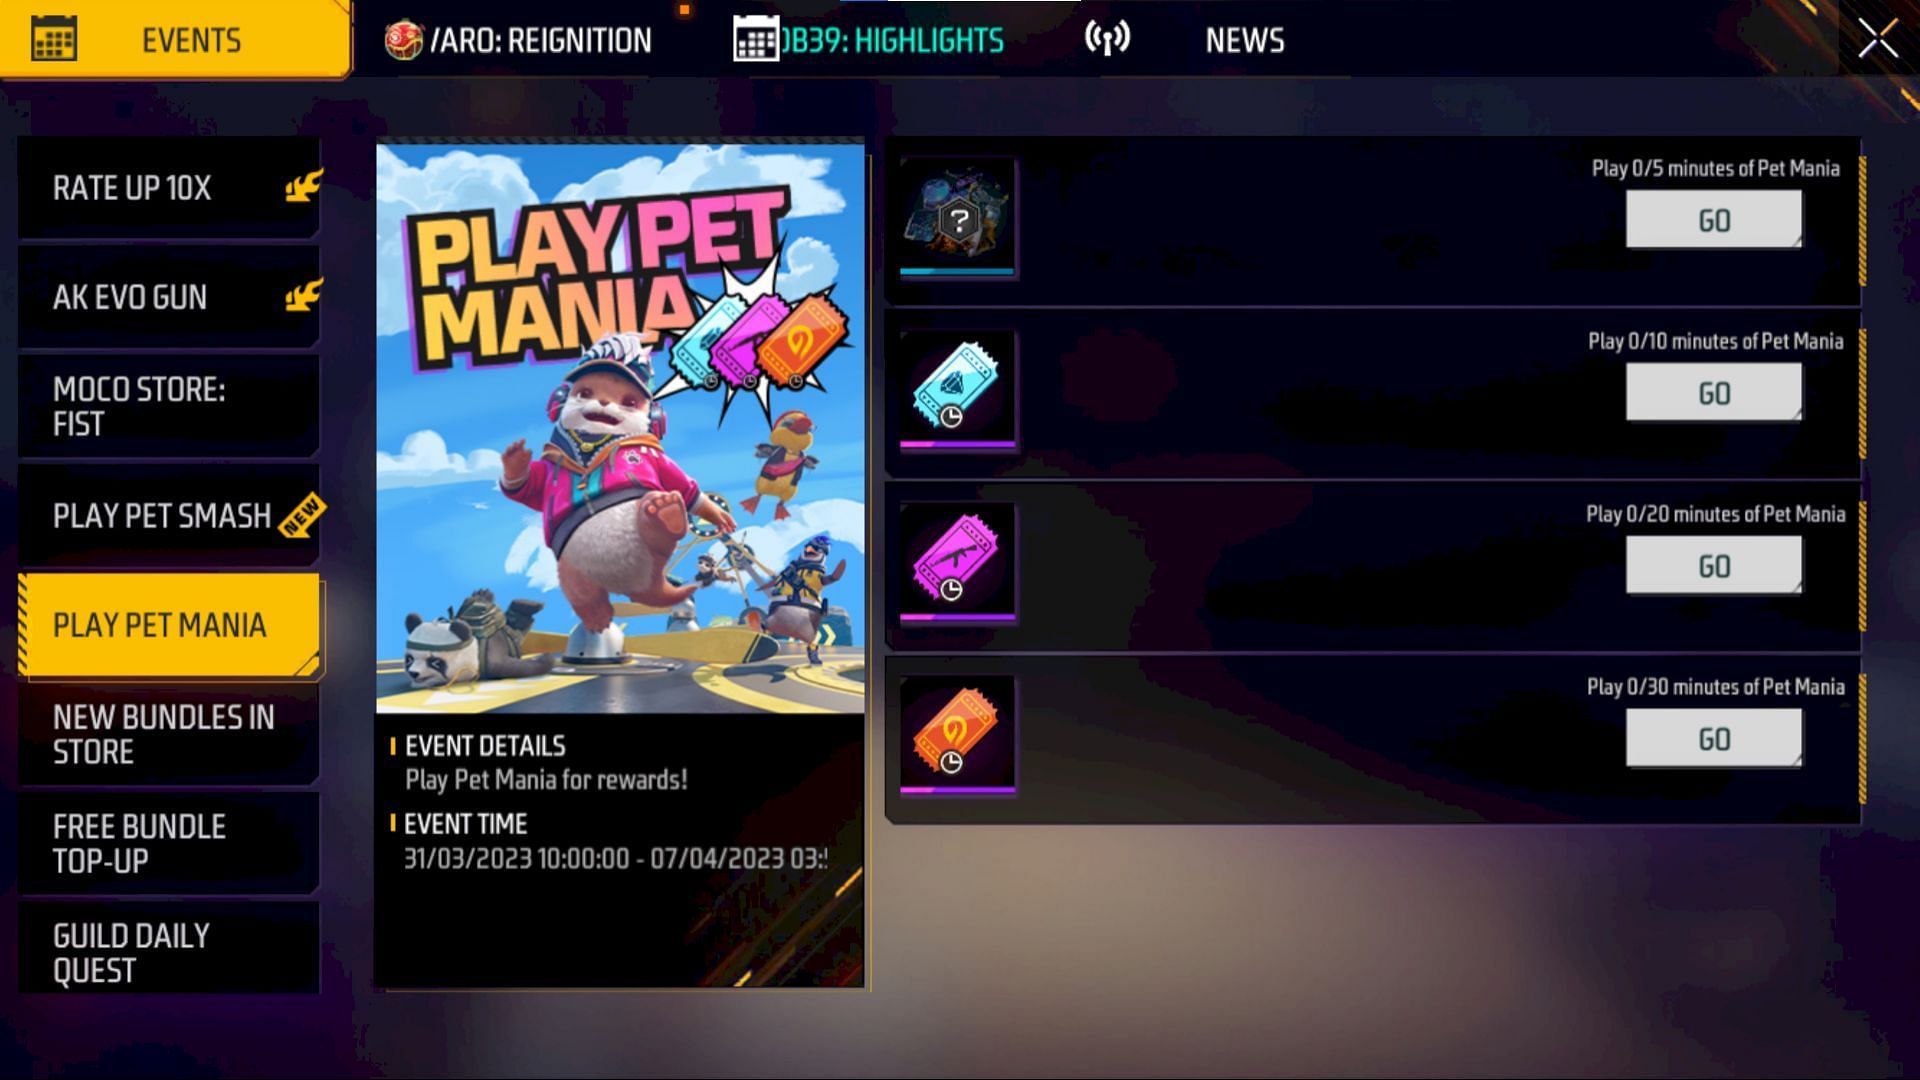 A new event for both modes has been incorporated (Image via Garena)